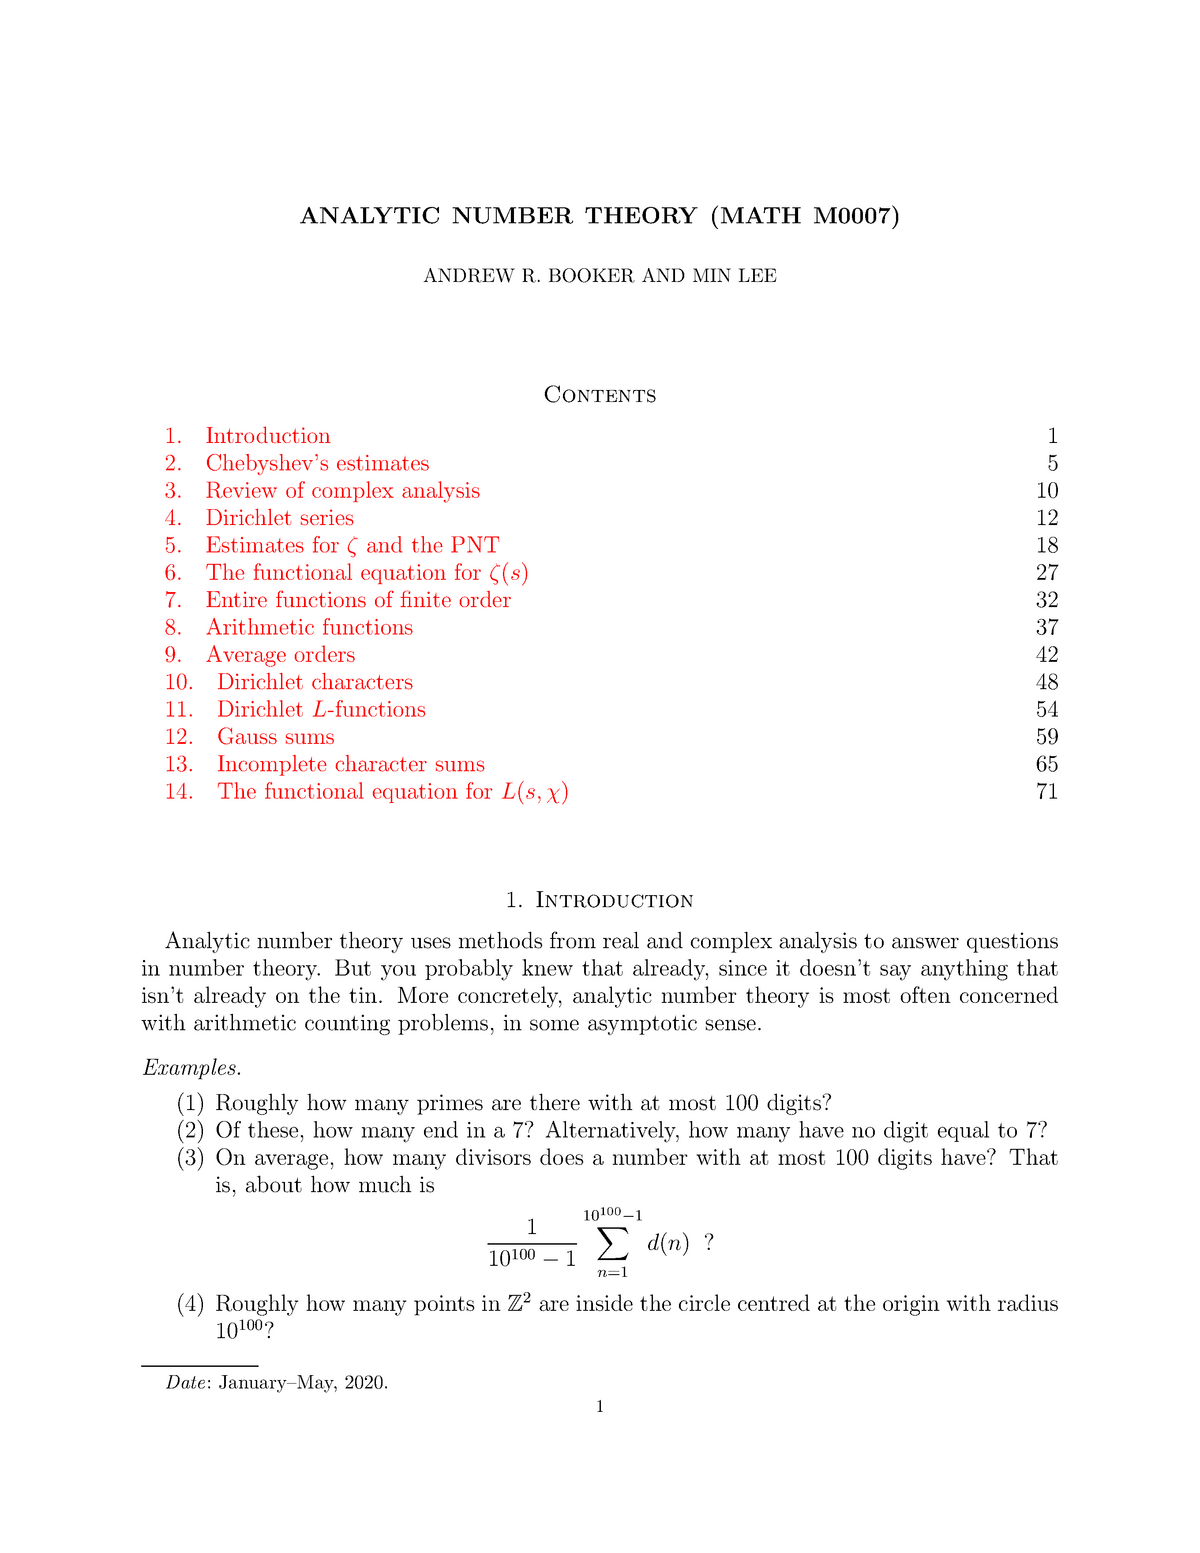 phd topics in analytic number theory